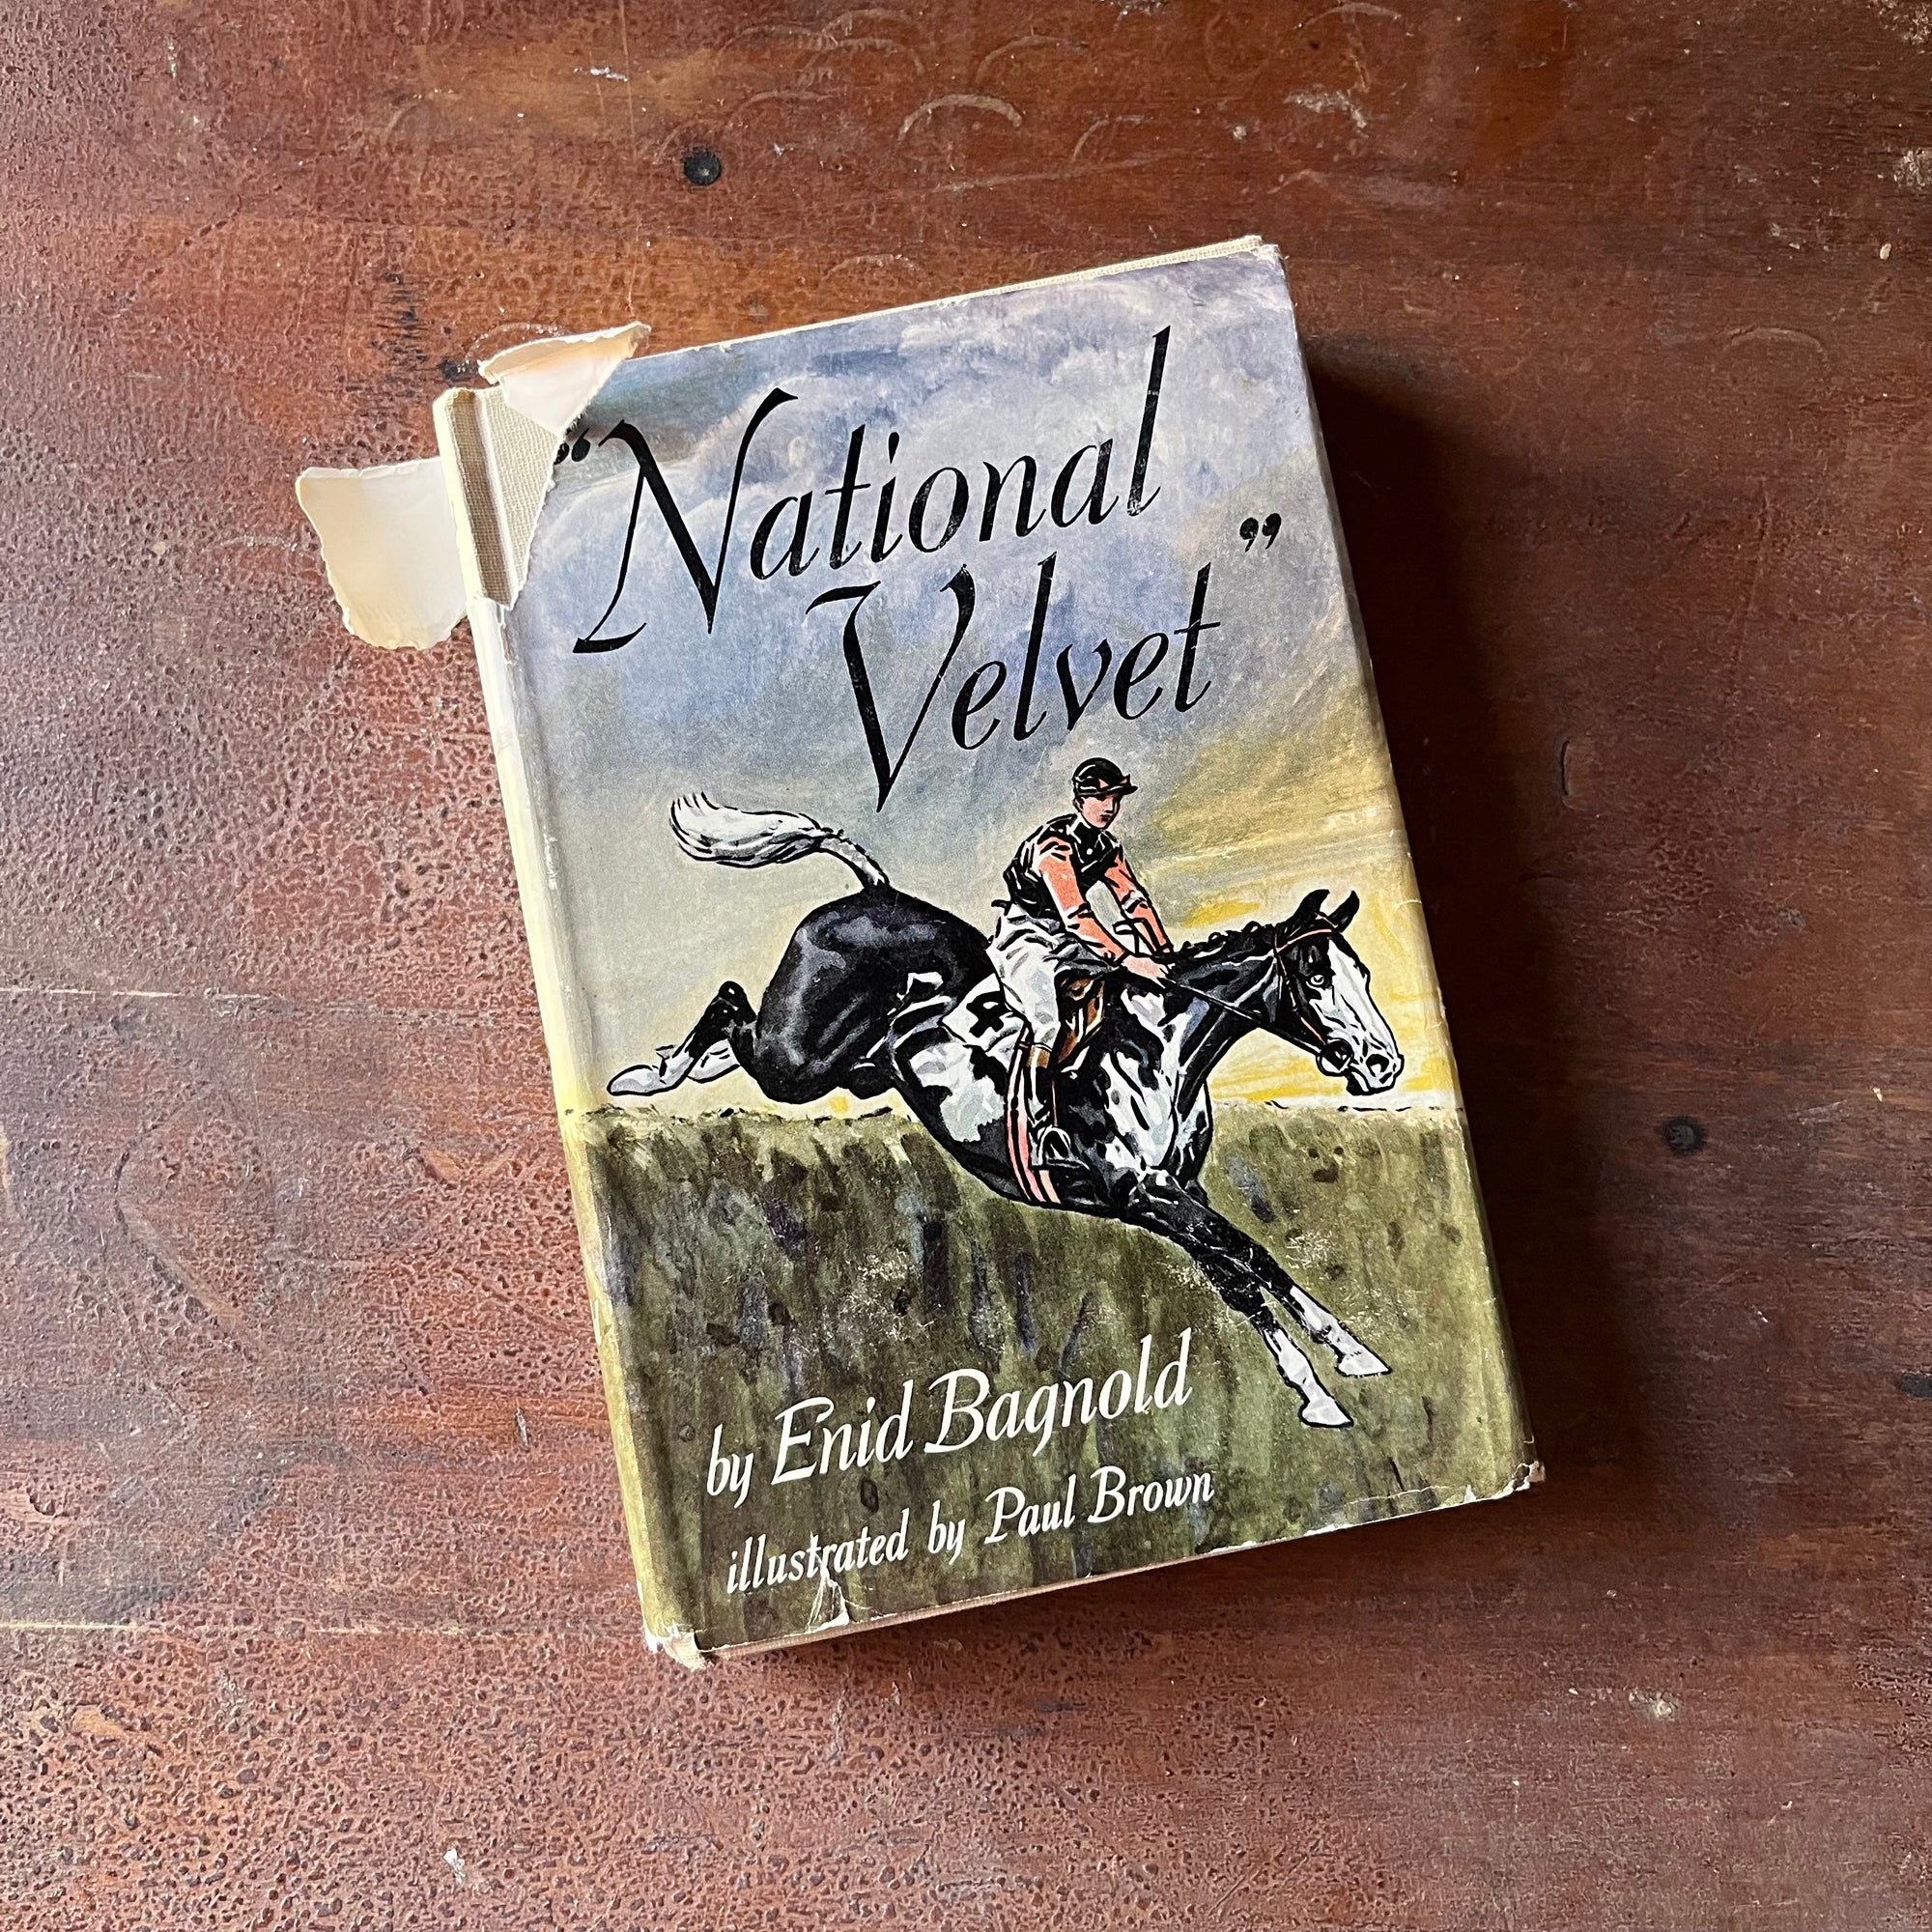 Log Cabin Vintage – vintage children’s book, children’s book, chapter book – National Velvet by Enid Bagnold with illustrations by Paul Brown - view of the dust jacket's front cover